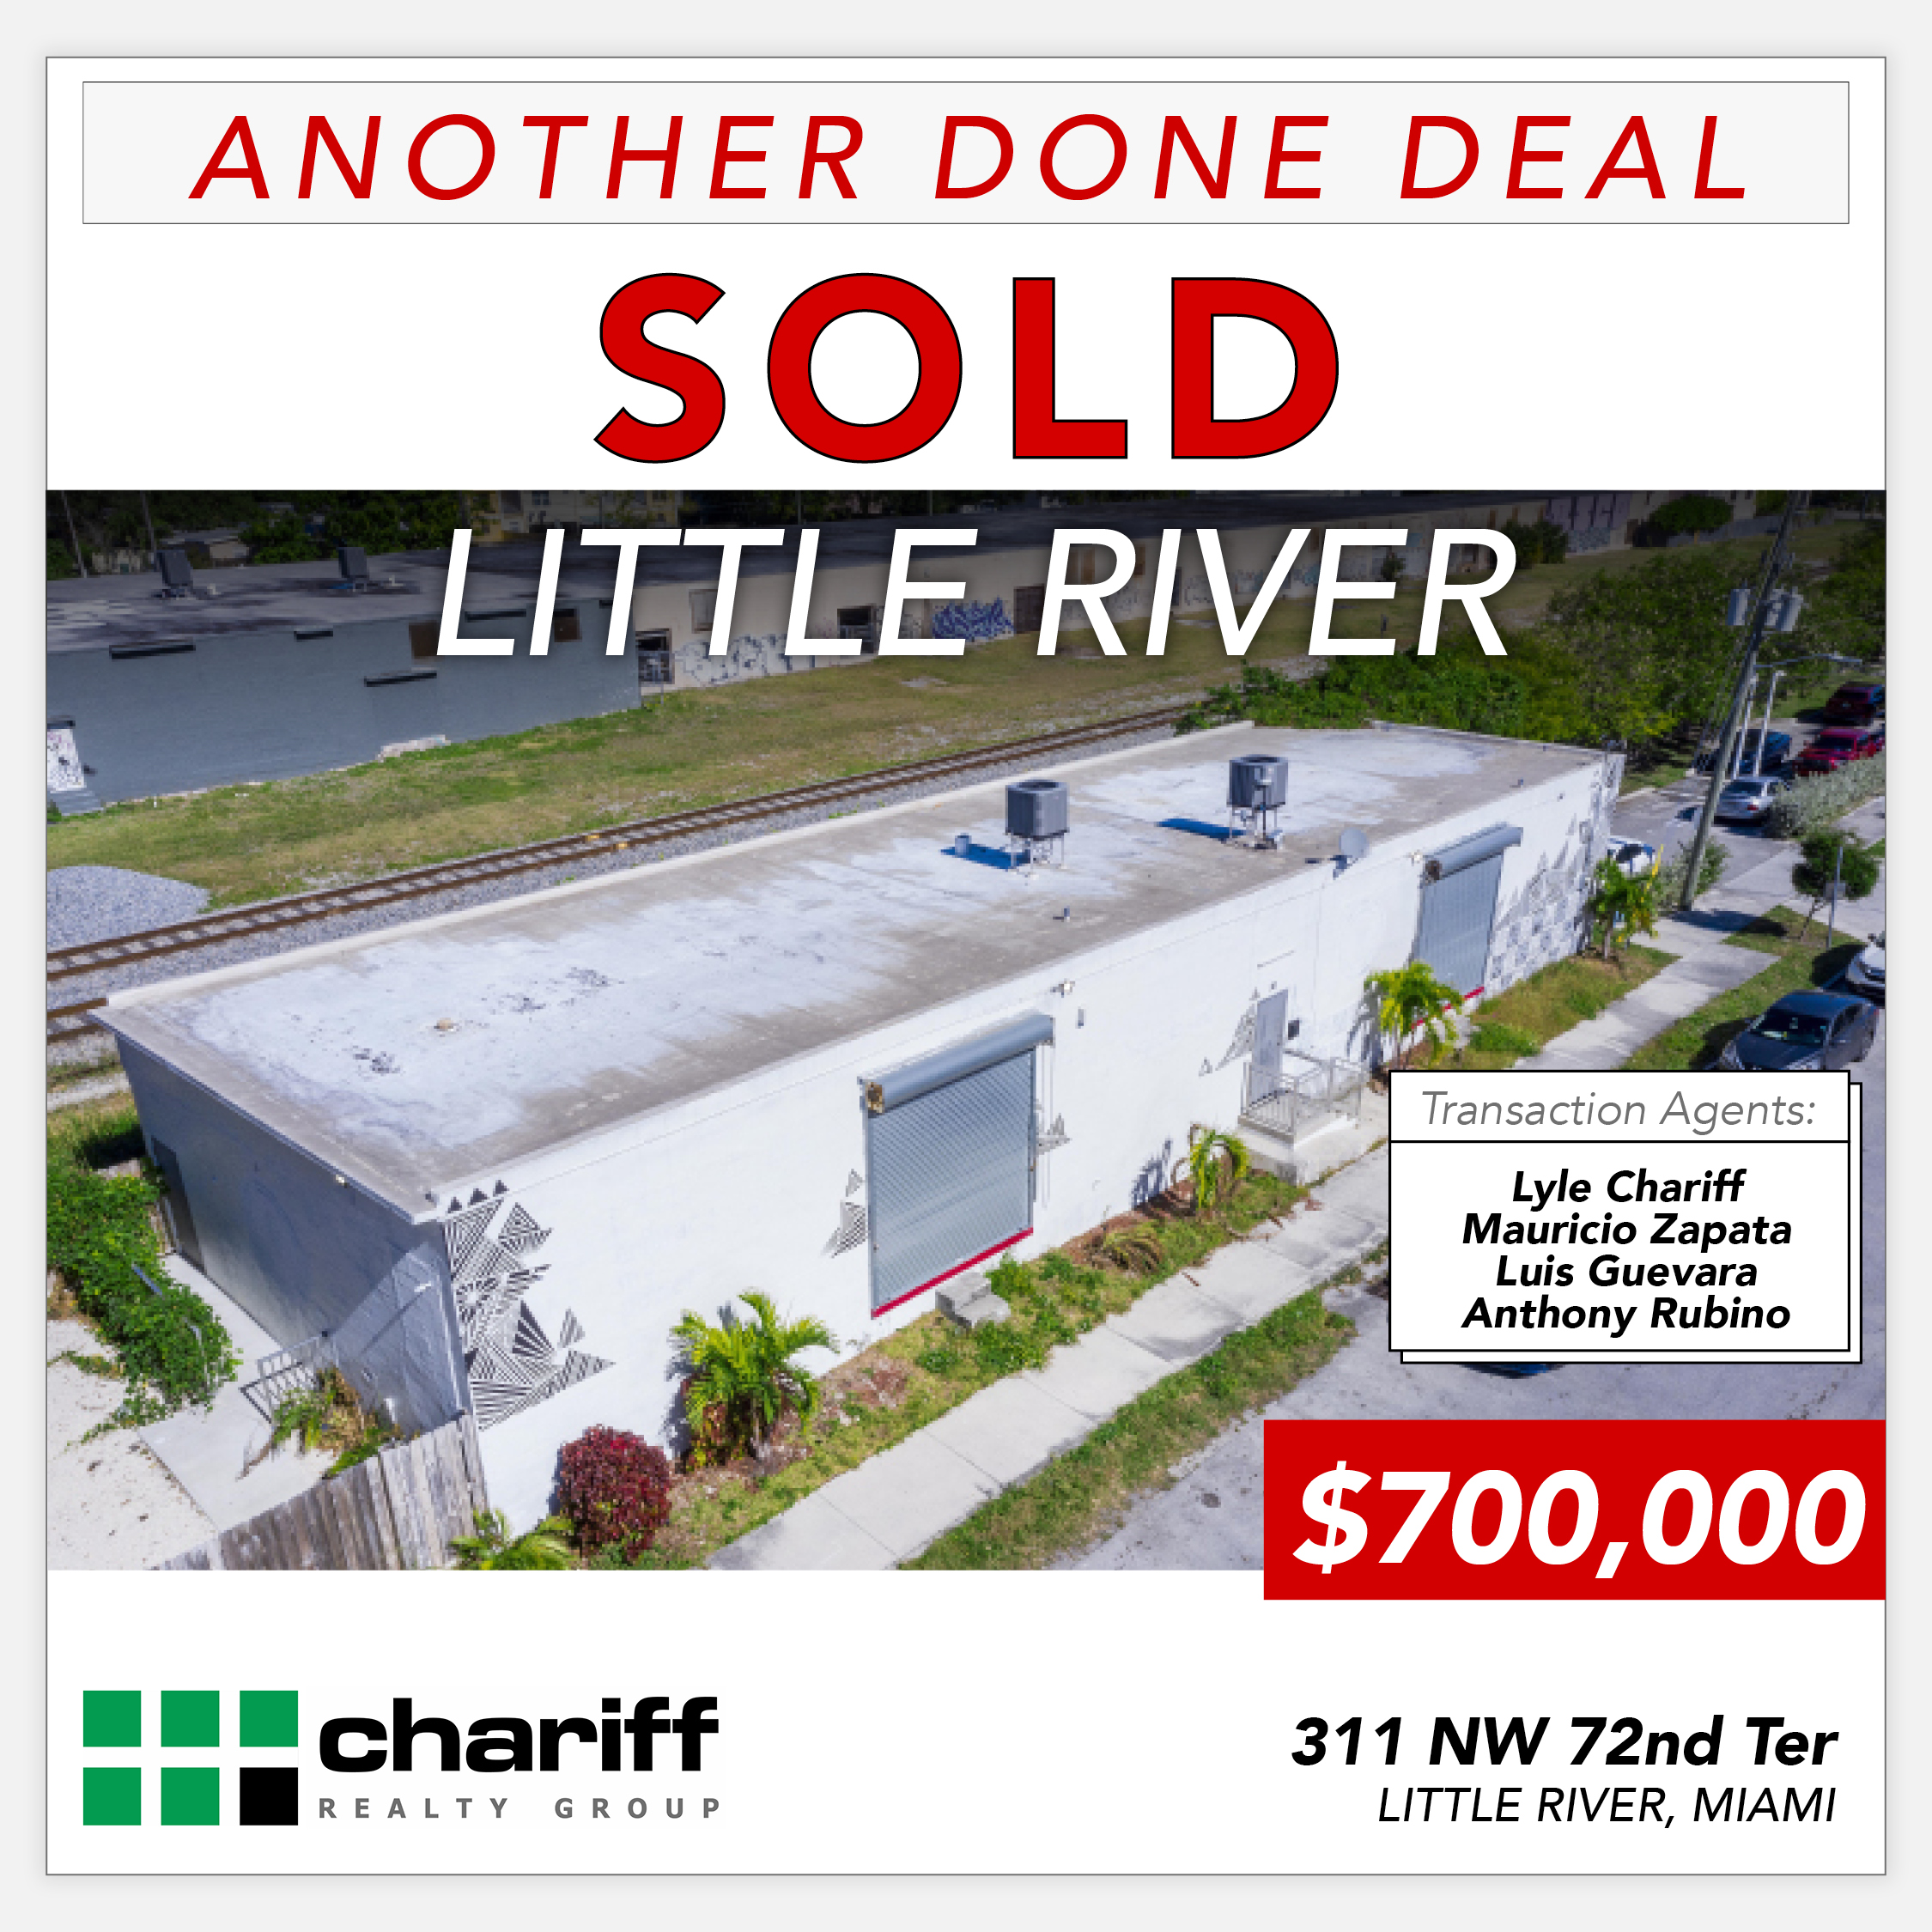 311 NW 72nd Terr - Another Done Deal- Sold - Little River-Miami-Florida-33150-Chariff Realty Group